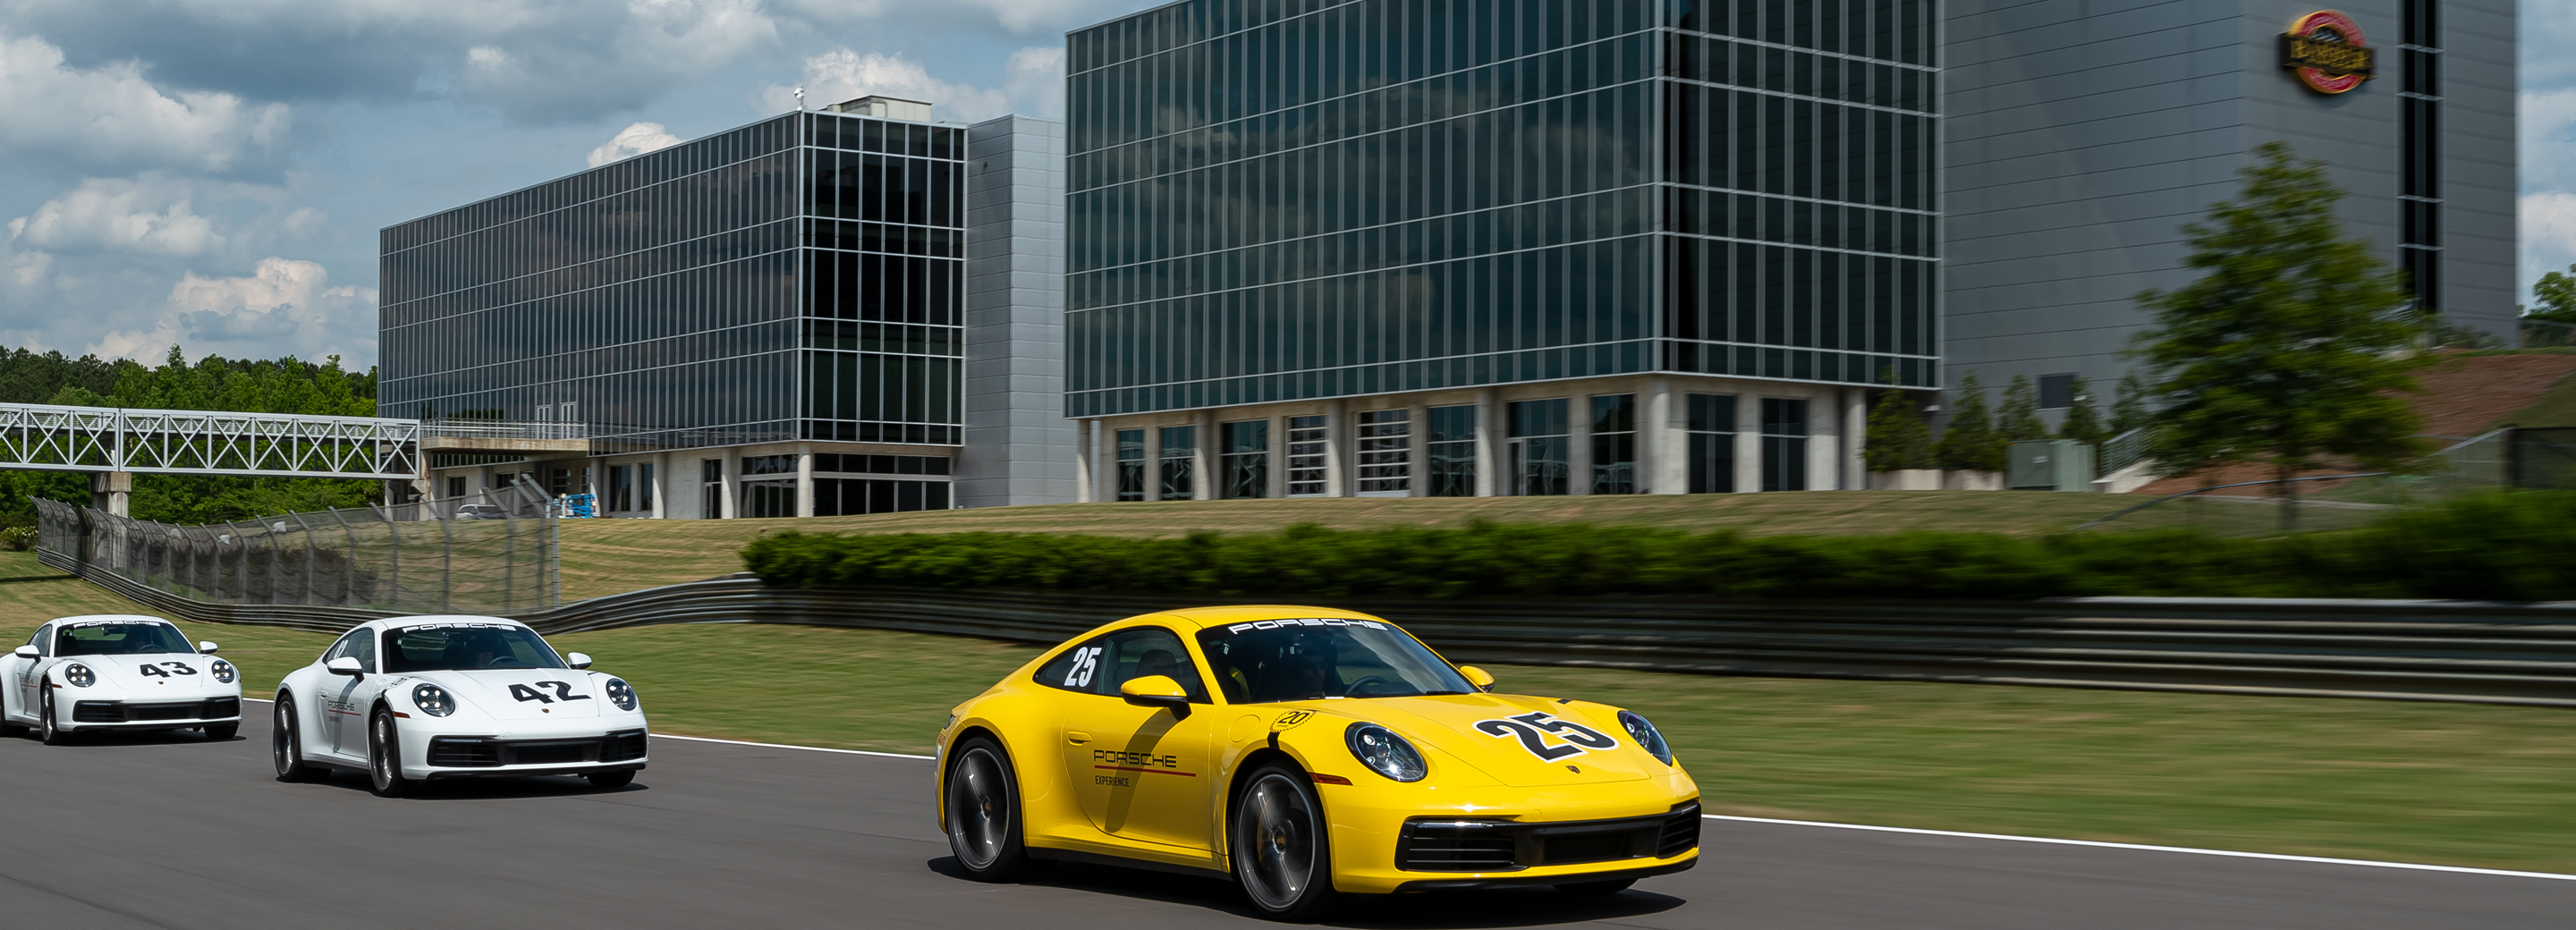 Courses Overview Header image - White Porsche on track